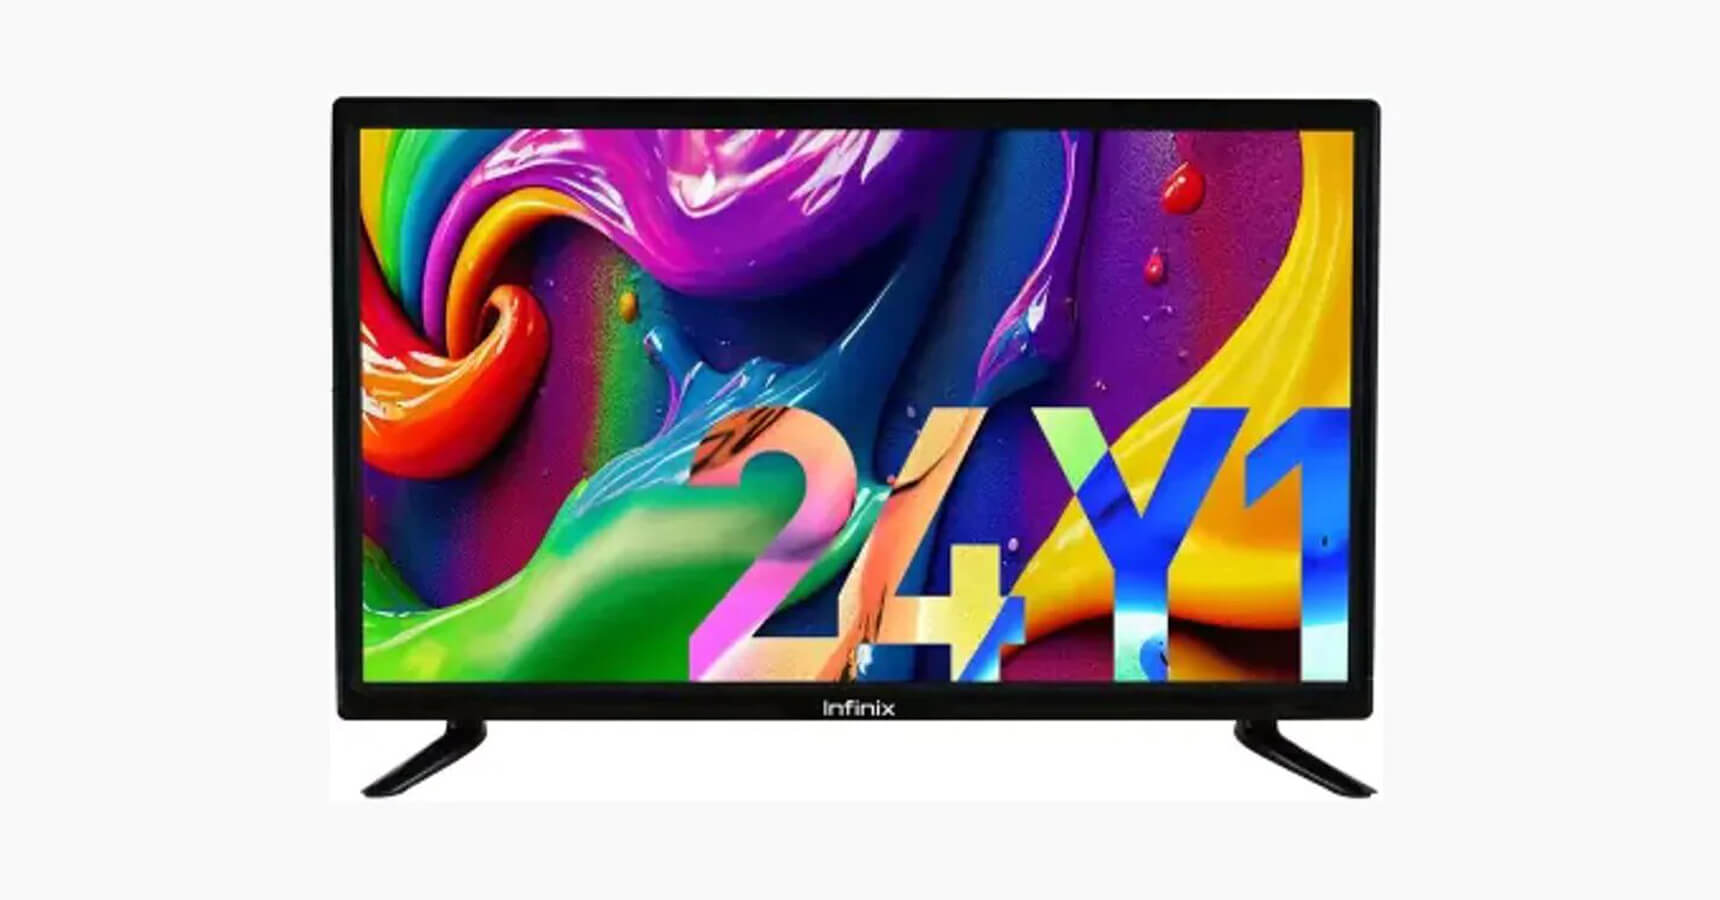 Infinix 24Y1 Smart TV Launched in India